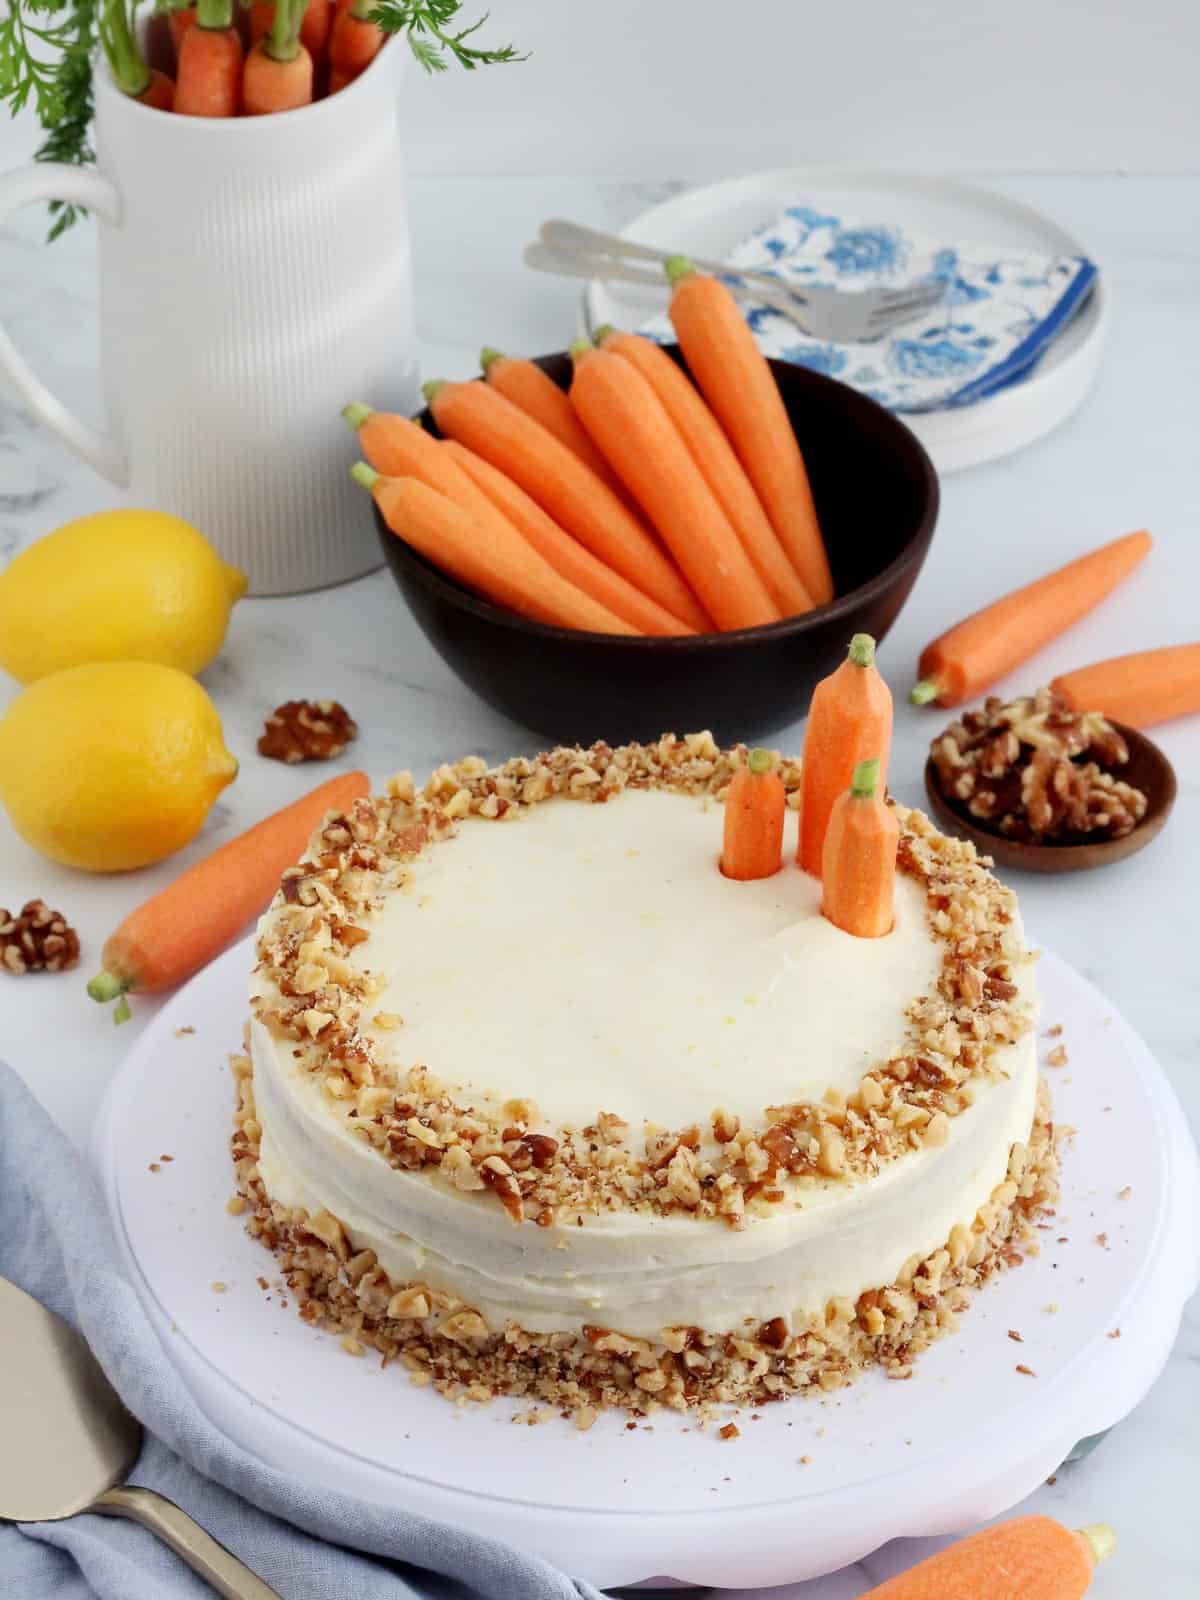 Carrot cake decorated with walnuts and whole carrots